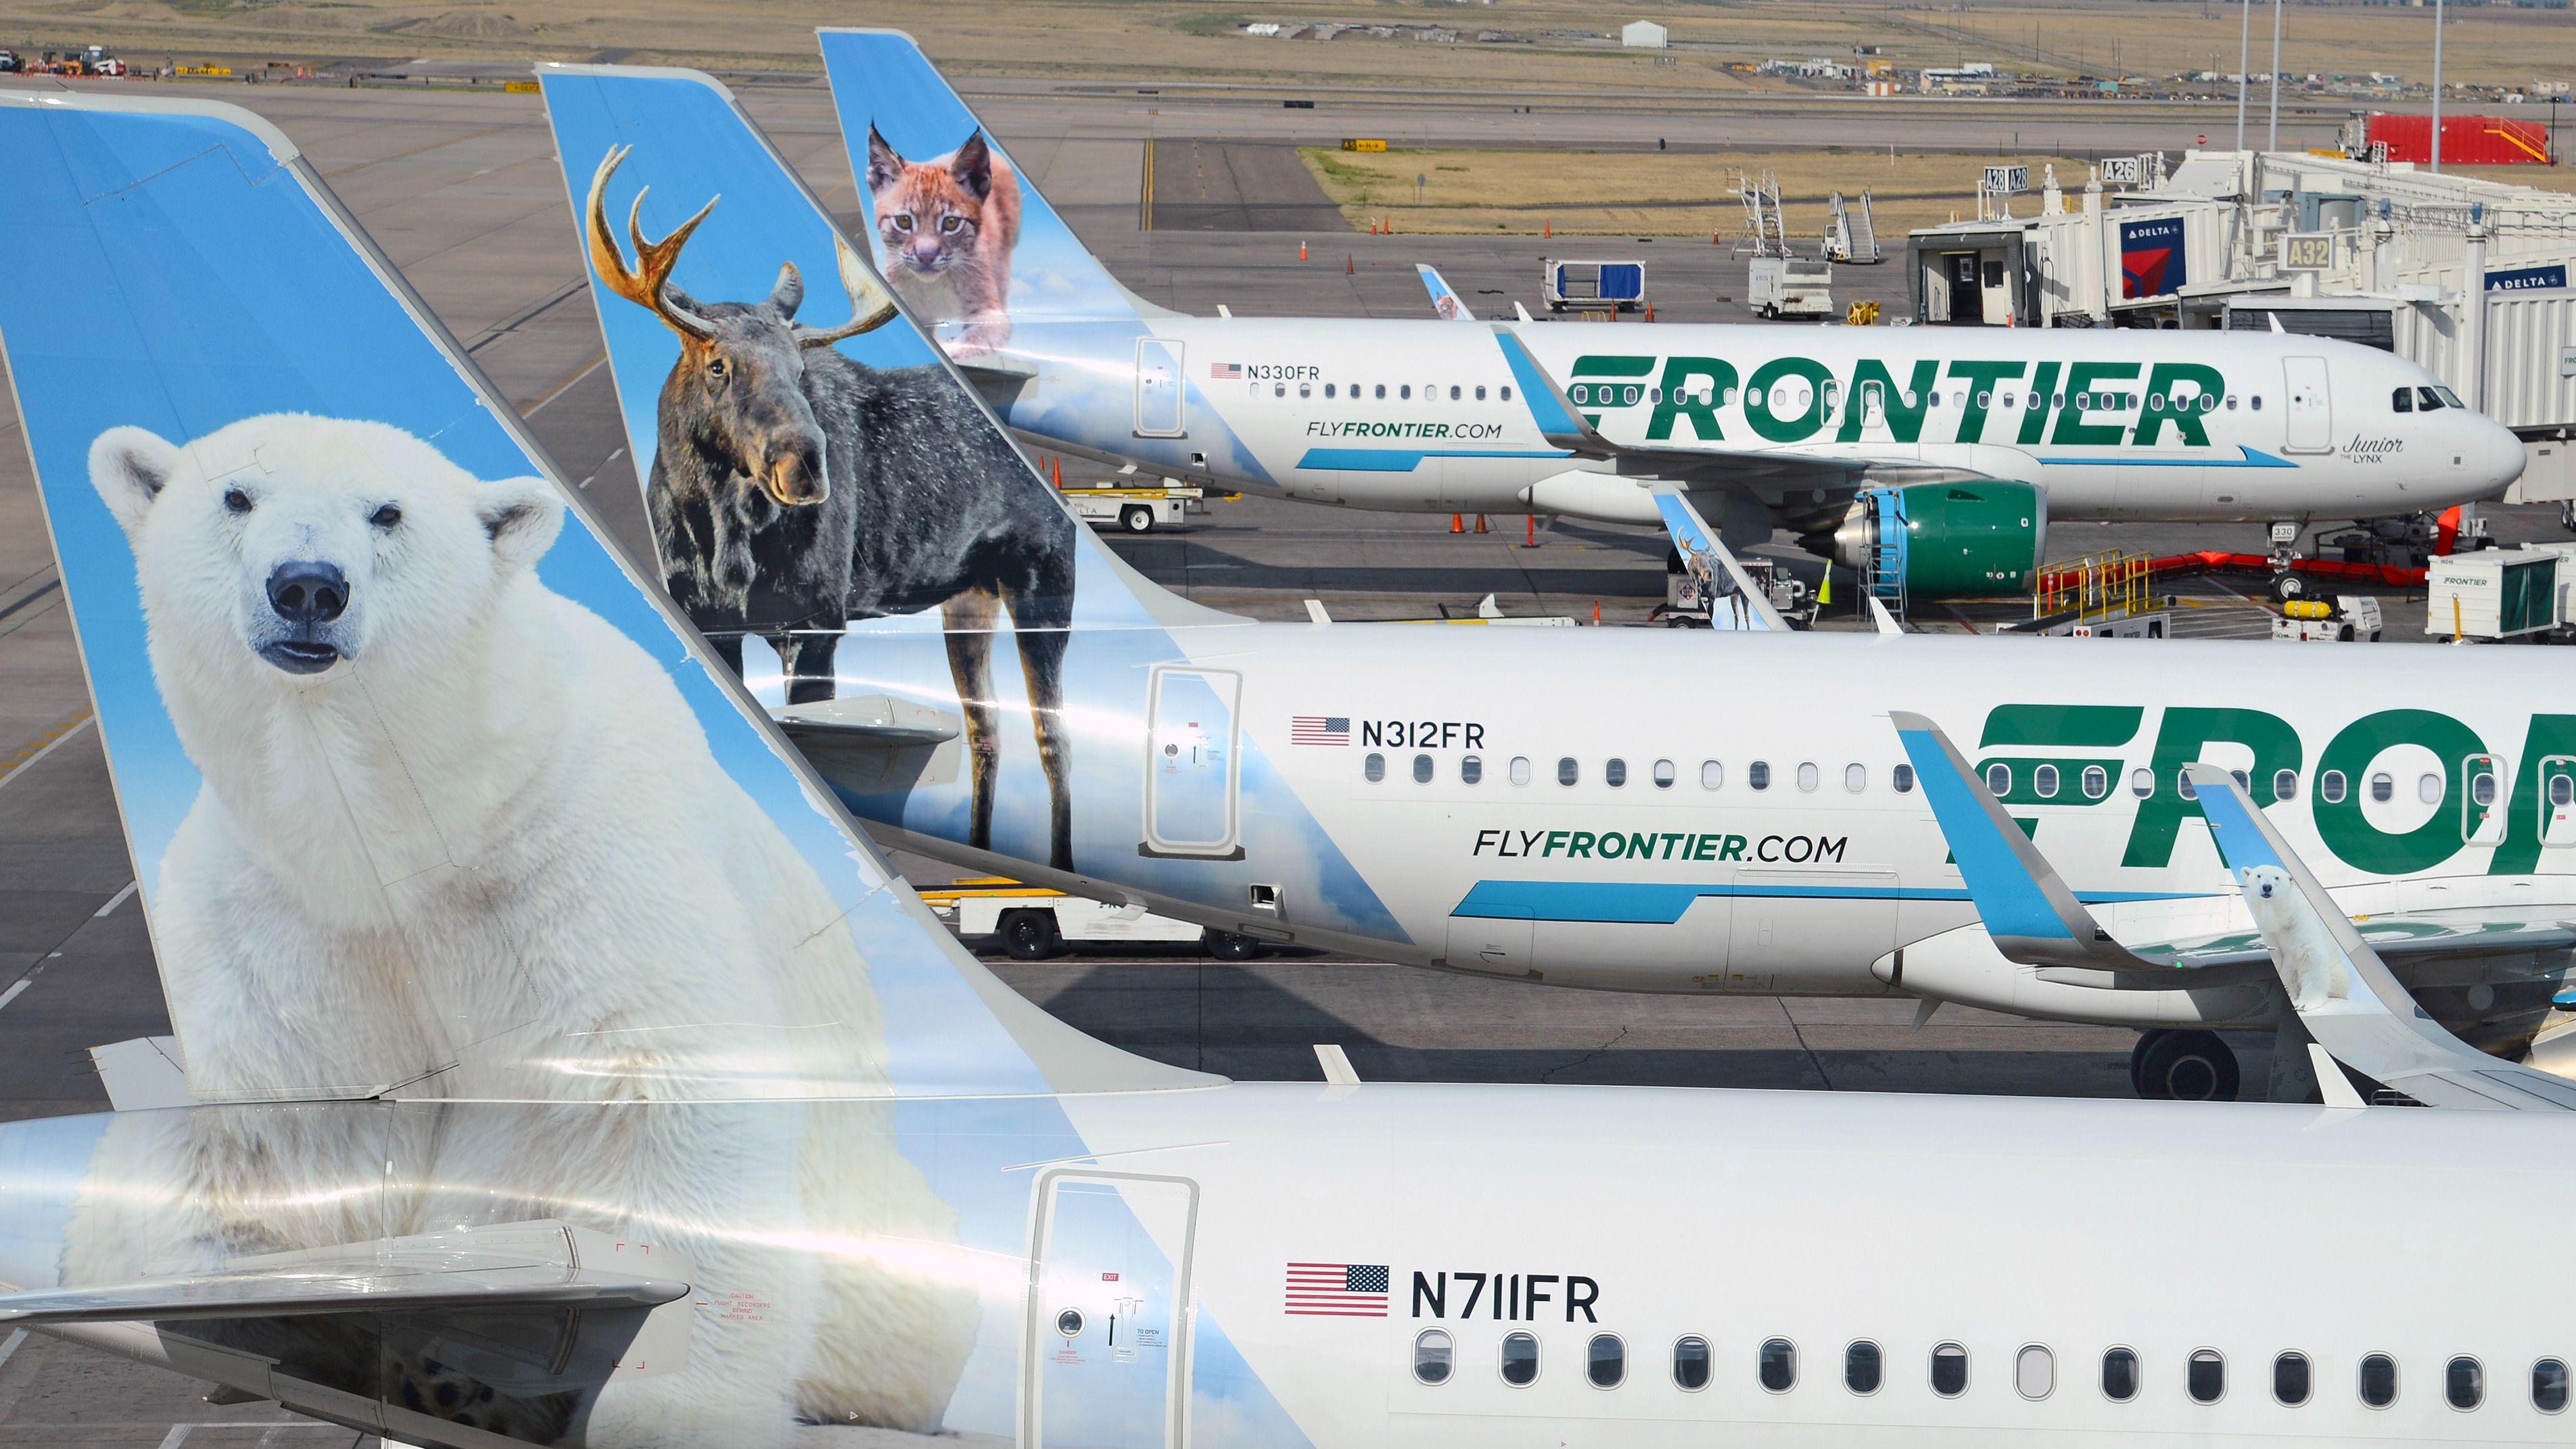 Several Frontier Airlines aircraft lined up.